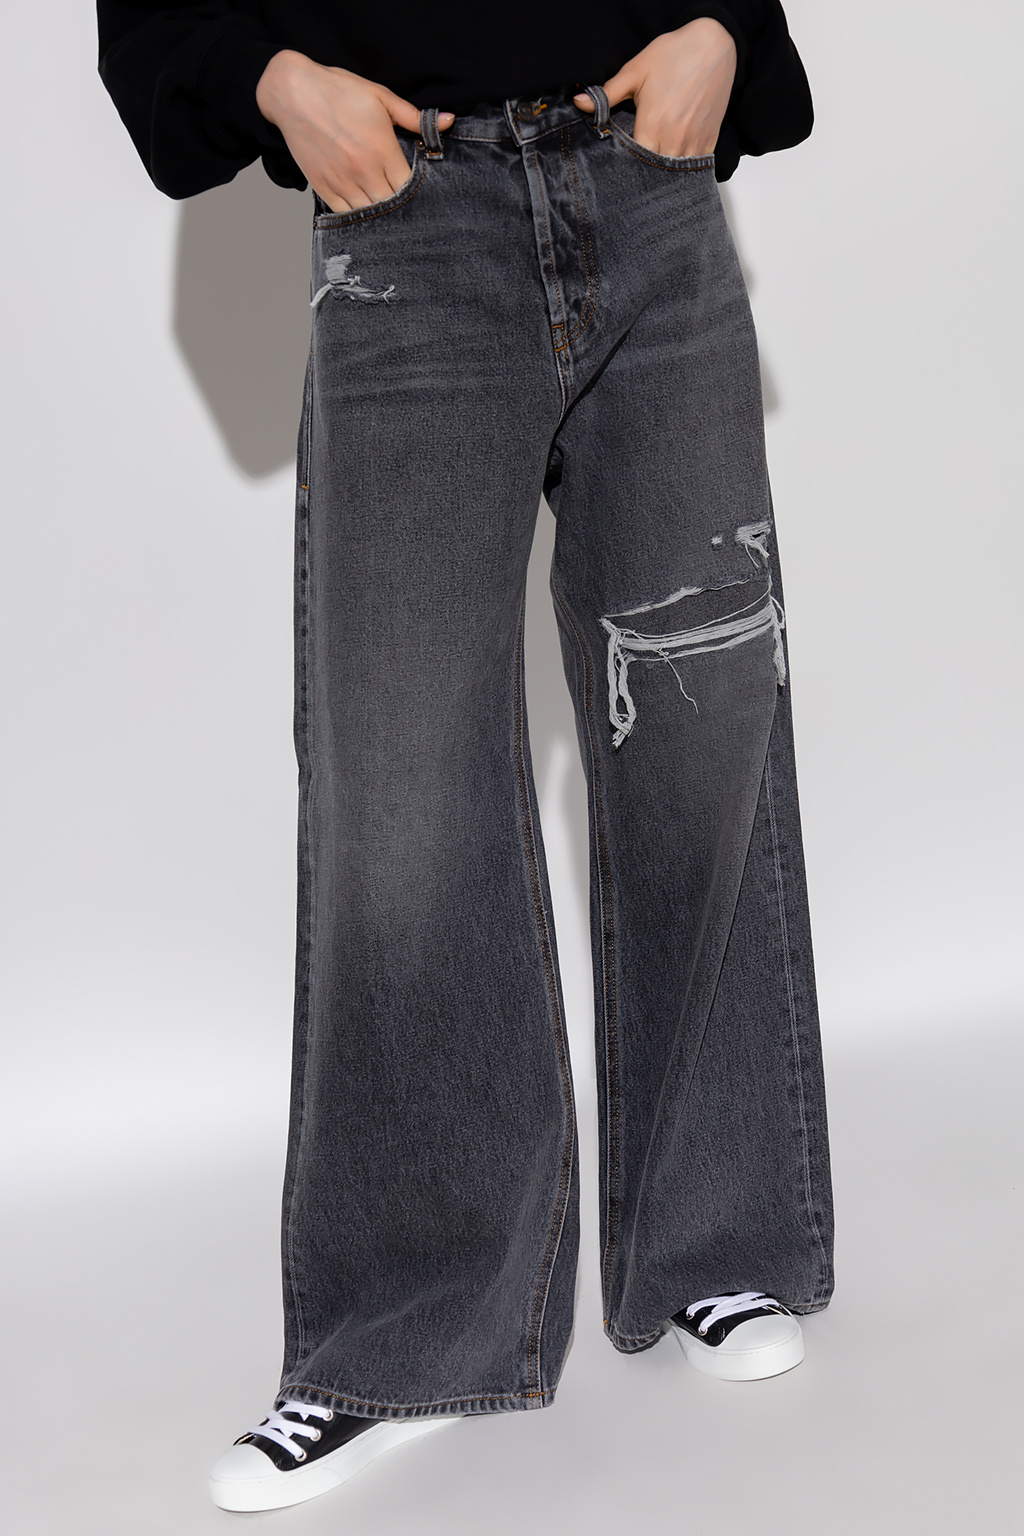 Diesel D-Rise jeans from Cross Shop (QC) : r/QualityReps